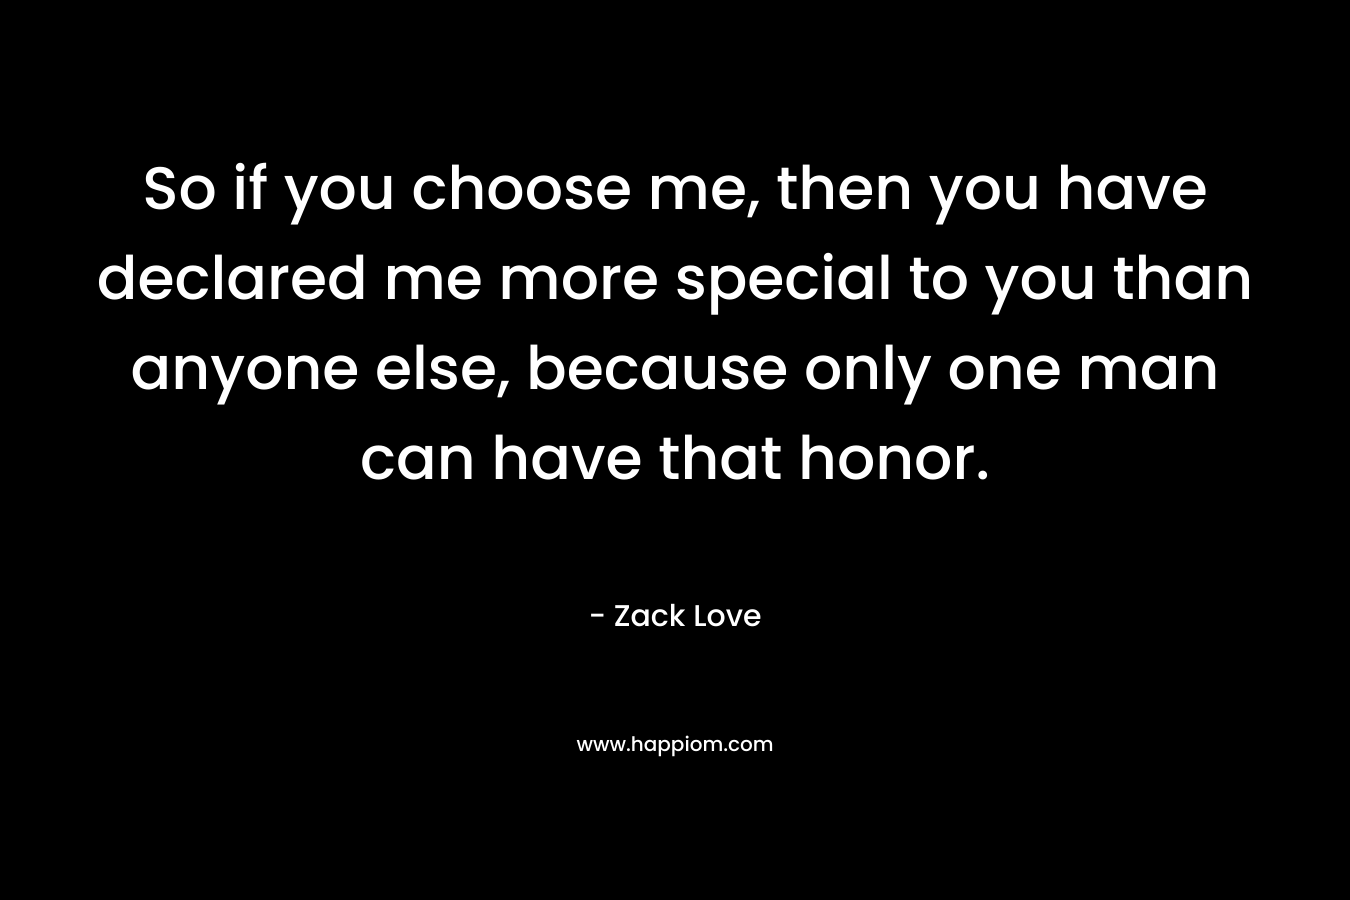 So if you choose me, then you have declared me more special to you than anyone else, because only one man can have that honor. – Zack Love